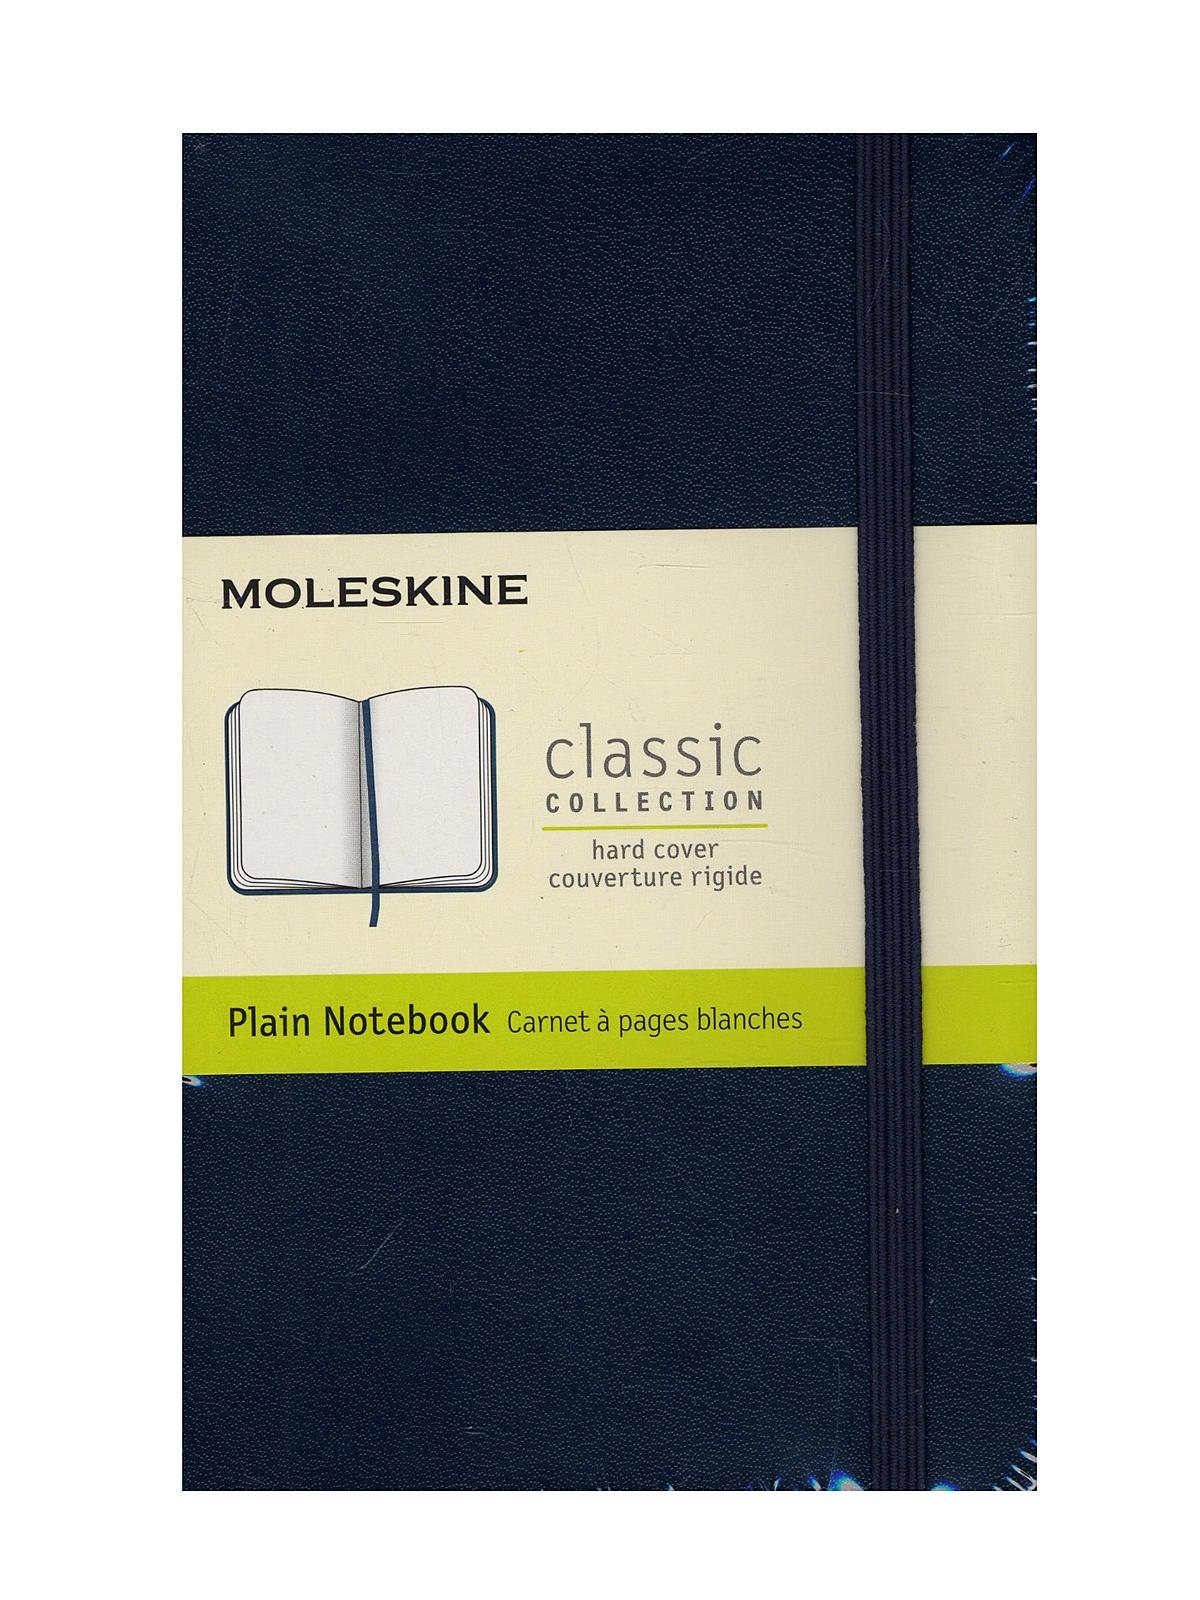 Classic Hard Cover Notebooks Sapphire Blue 3 1 2 In. X 5 1 2 In. 192 Pages, Unlined